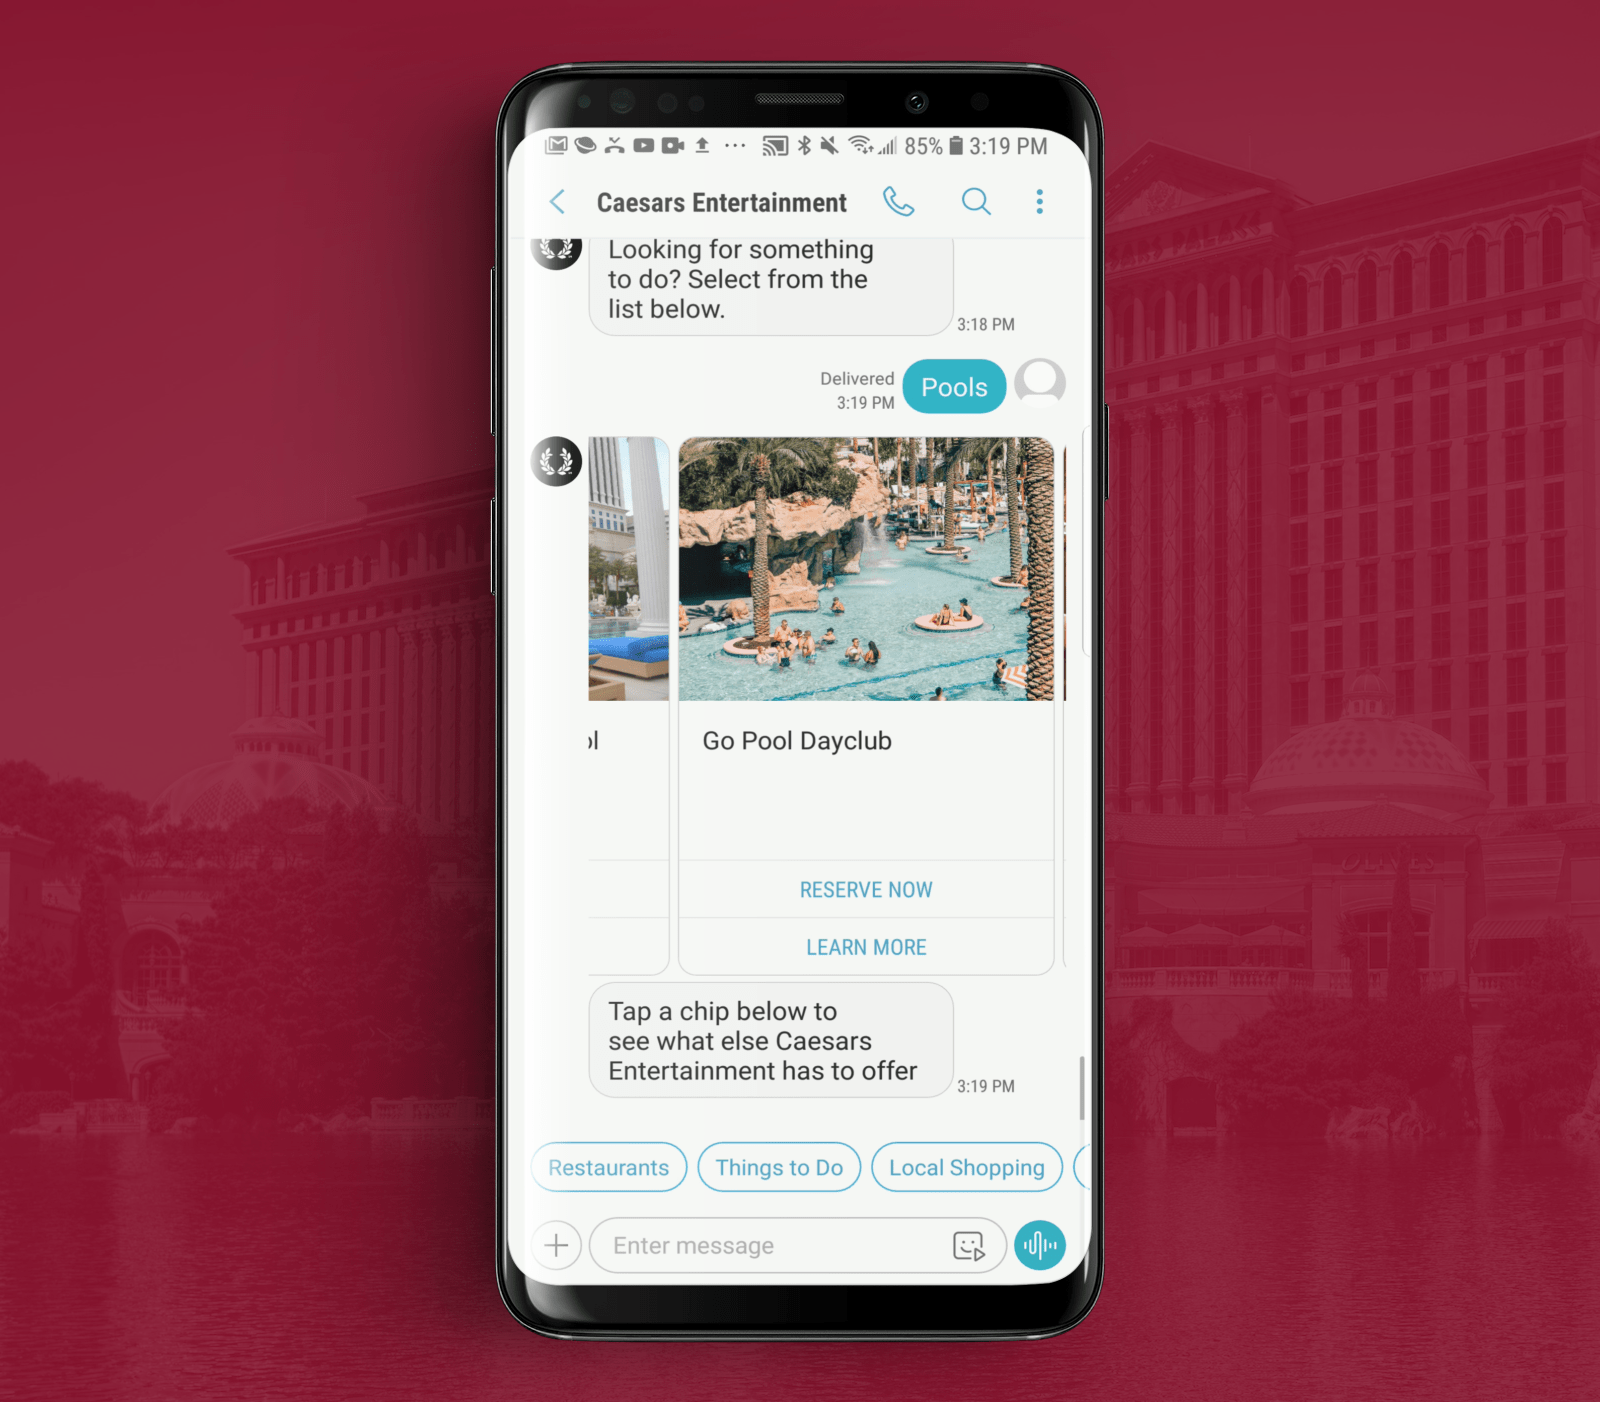 RCS Business Messaging Example from Caesars Entertainment 2